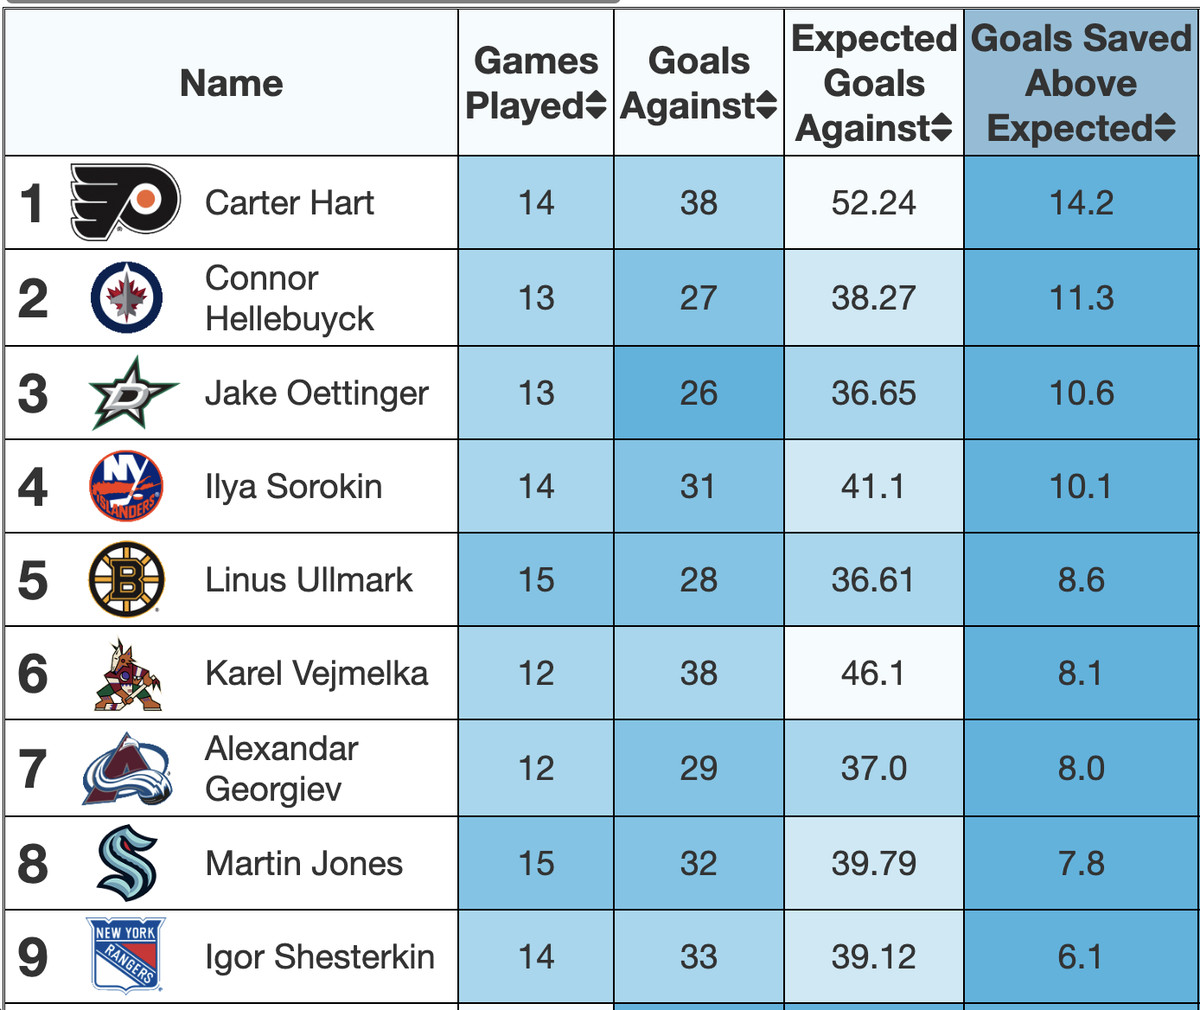 Goals Saved Above Expected Leaders via MoneyPuck